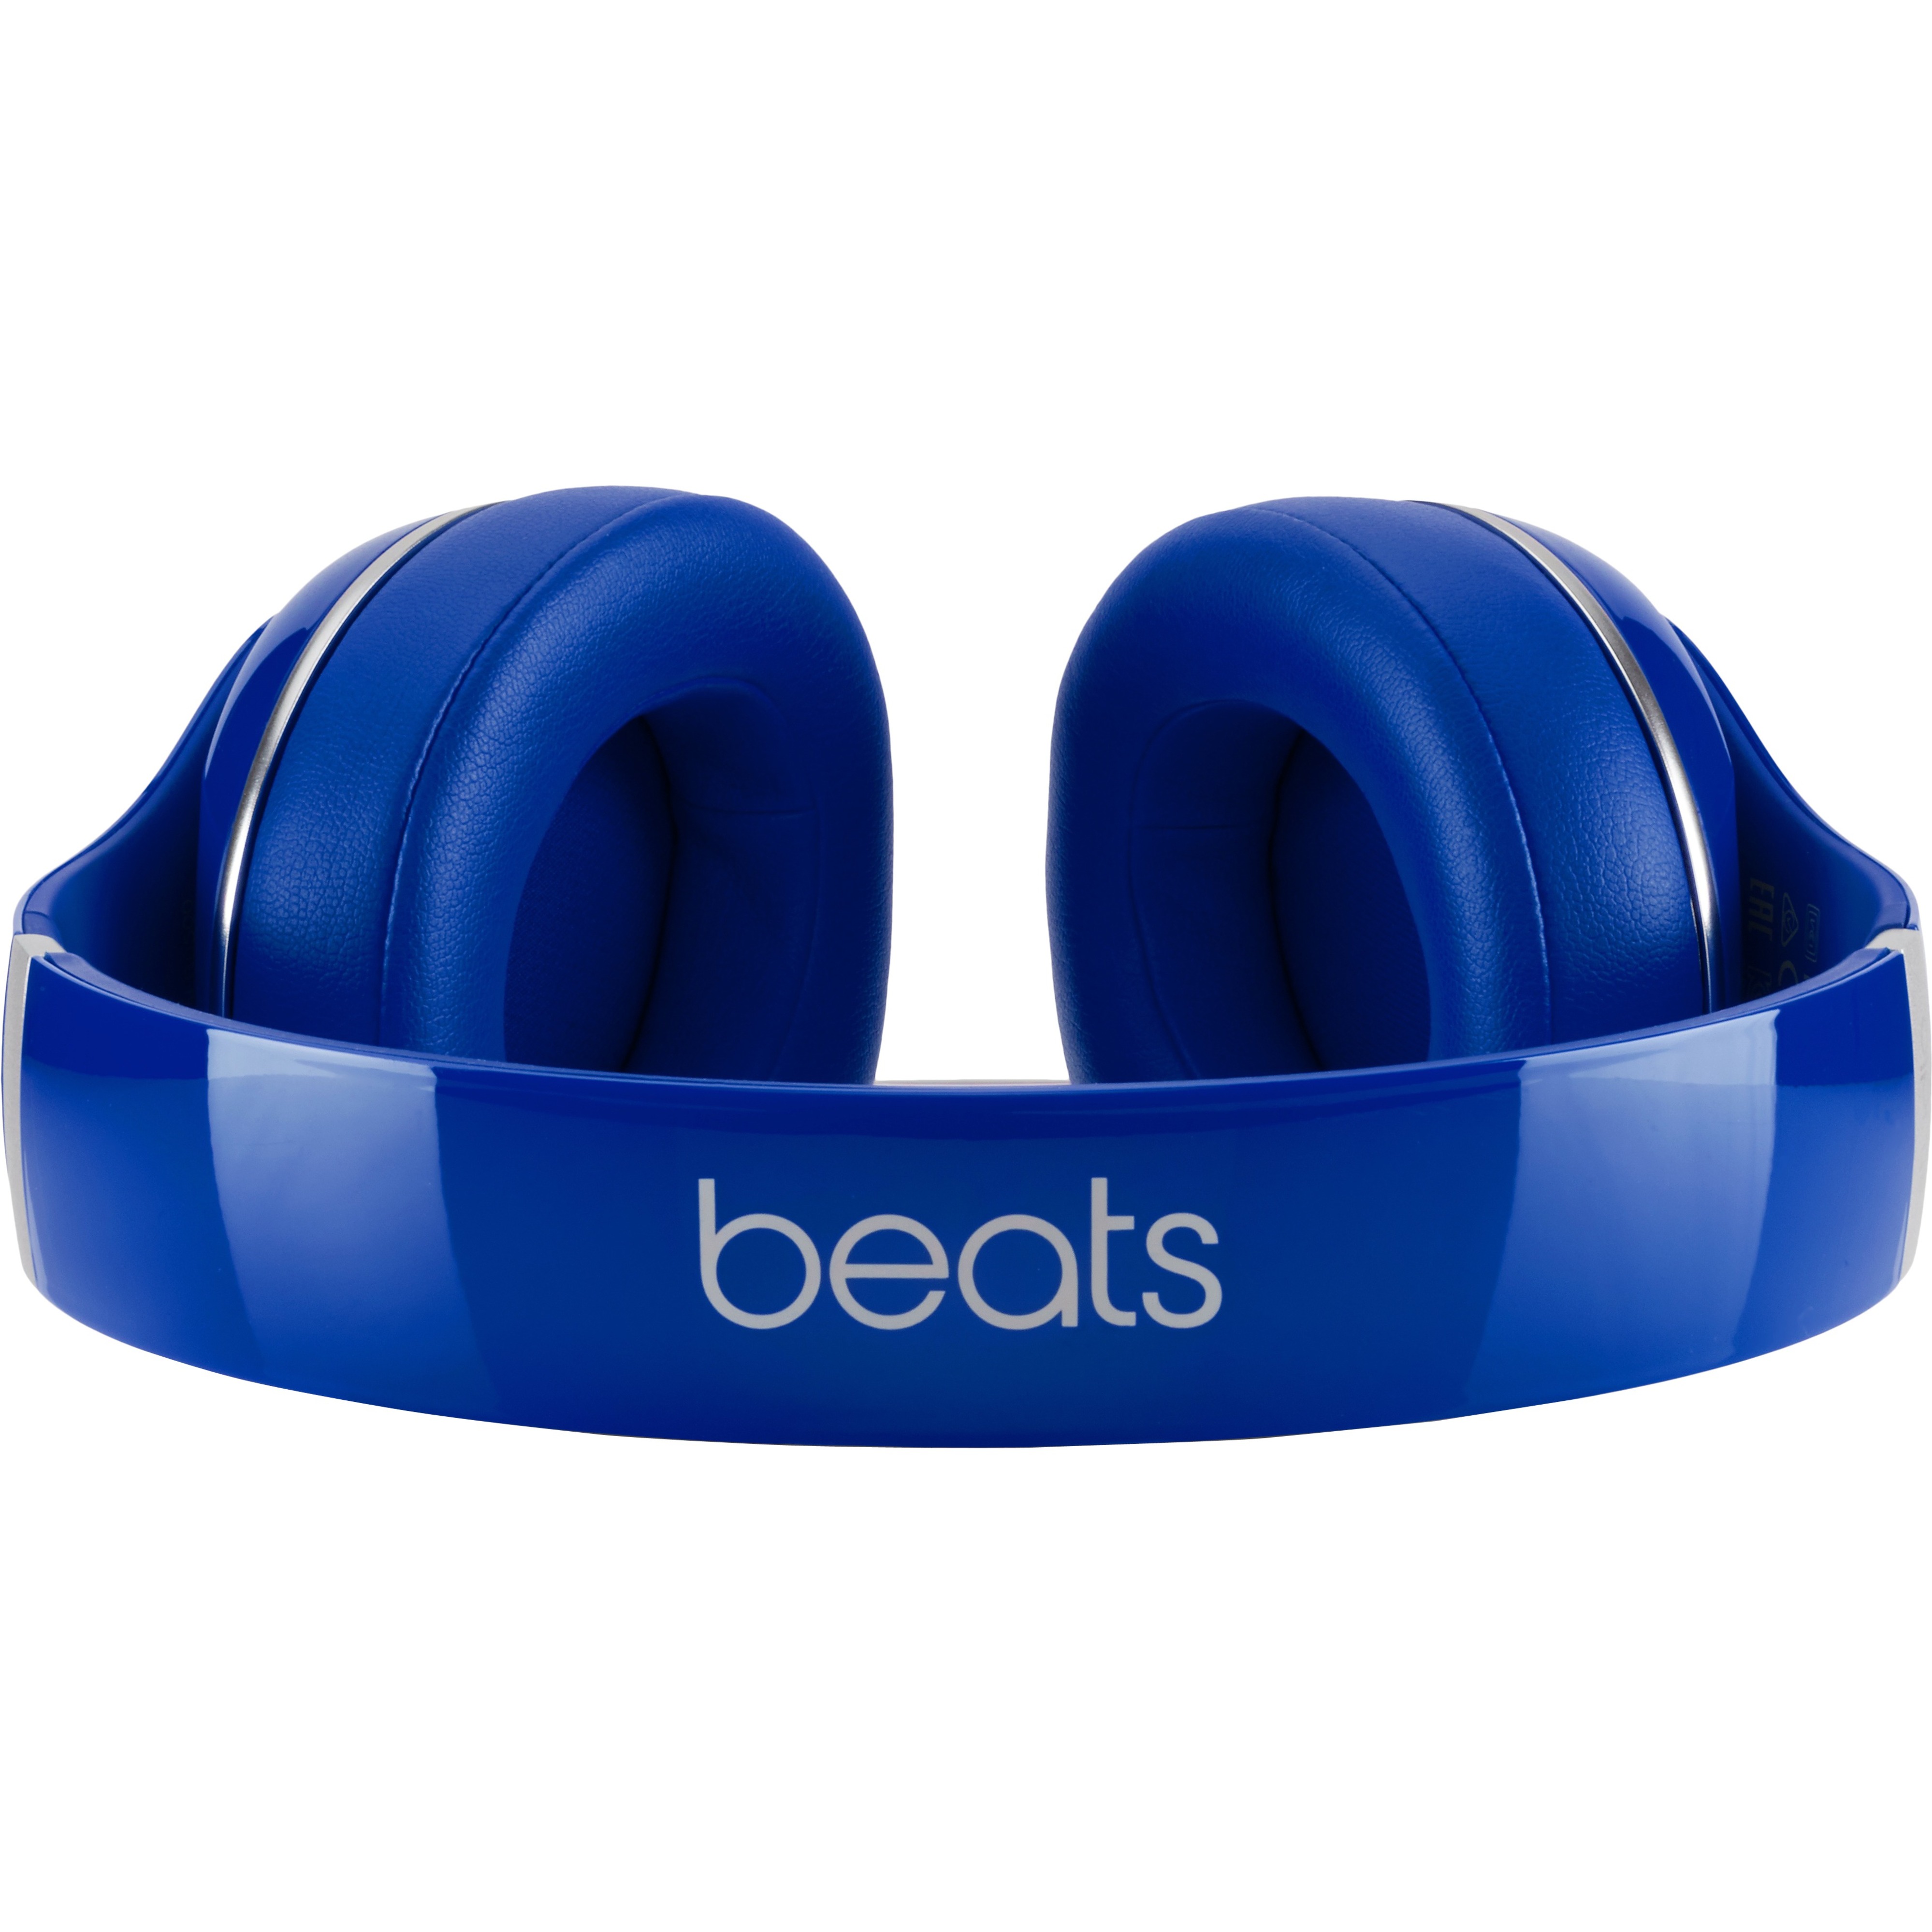 Beats by Dr. Dre Studio Wired Over-Ear Headphones - Blue - image 2 of 5